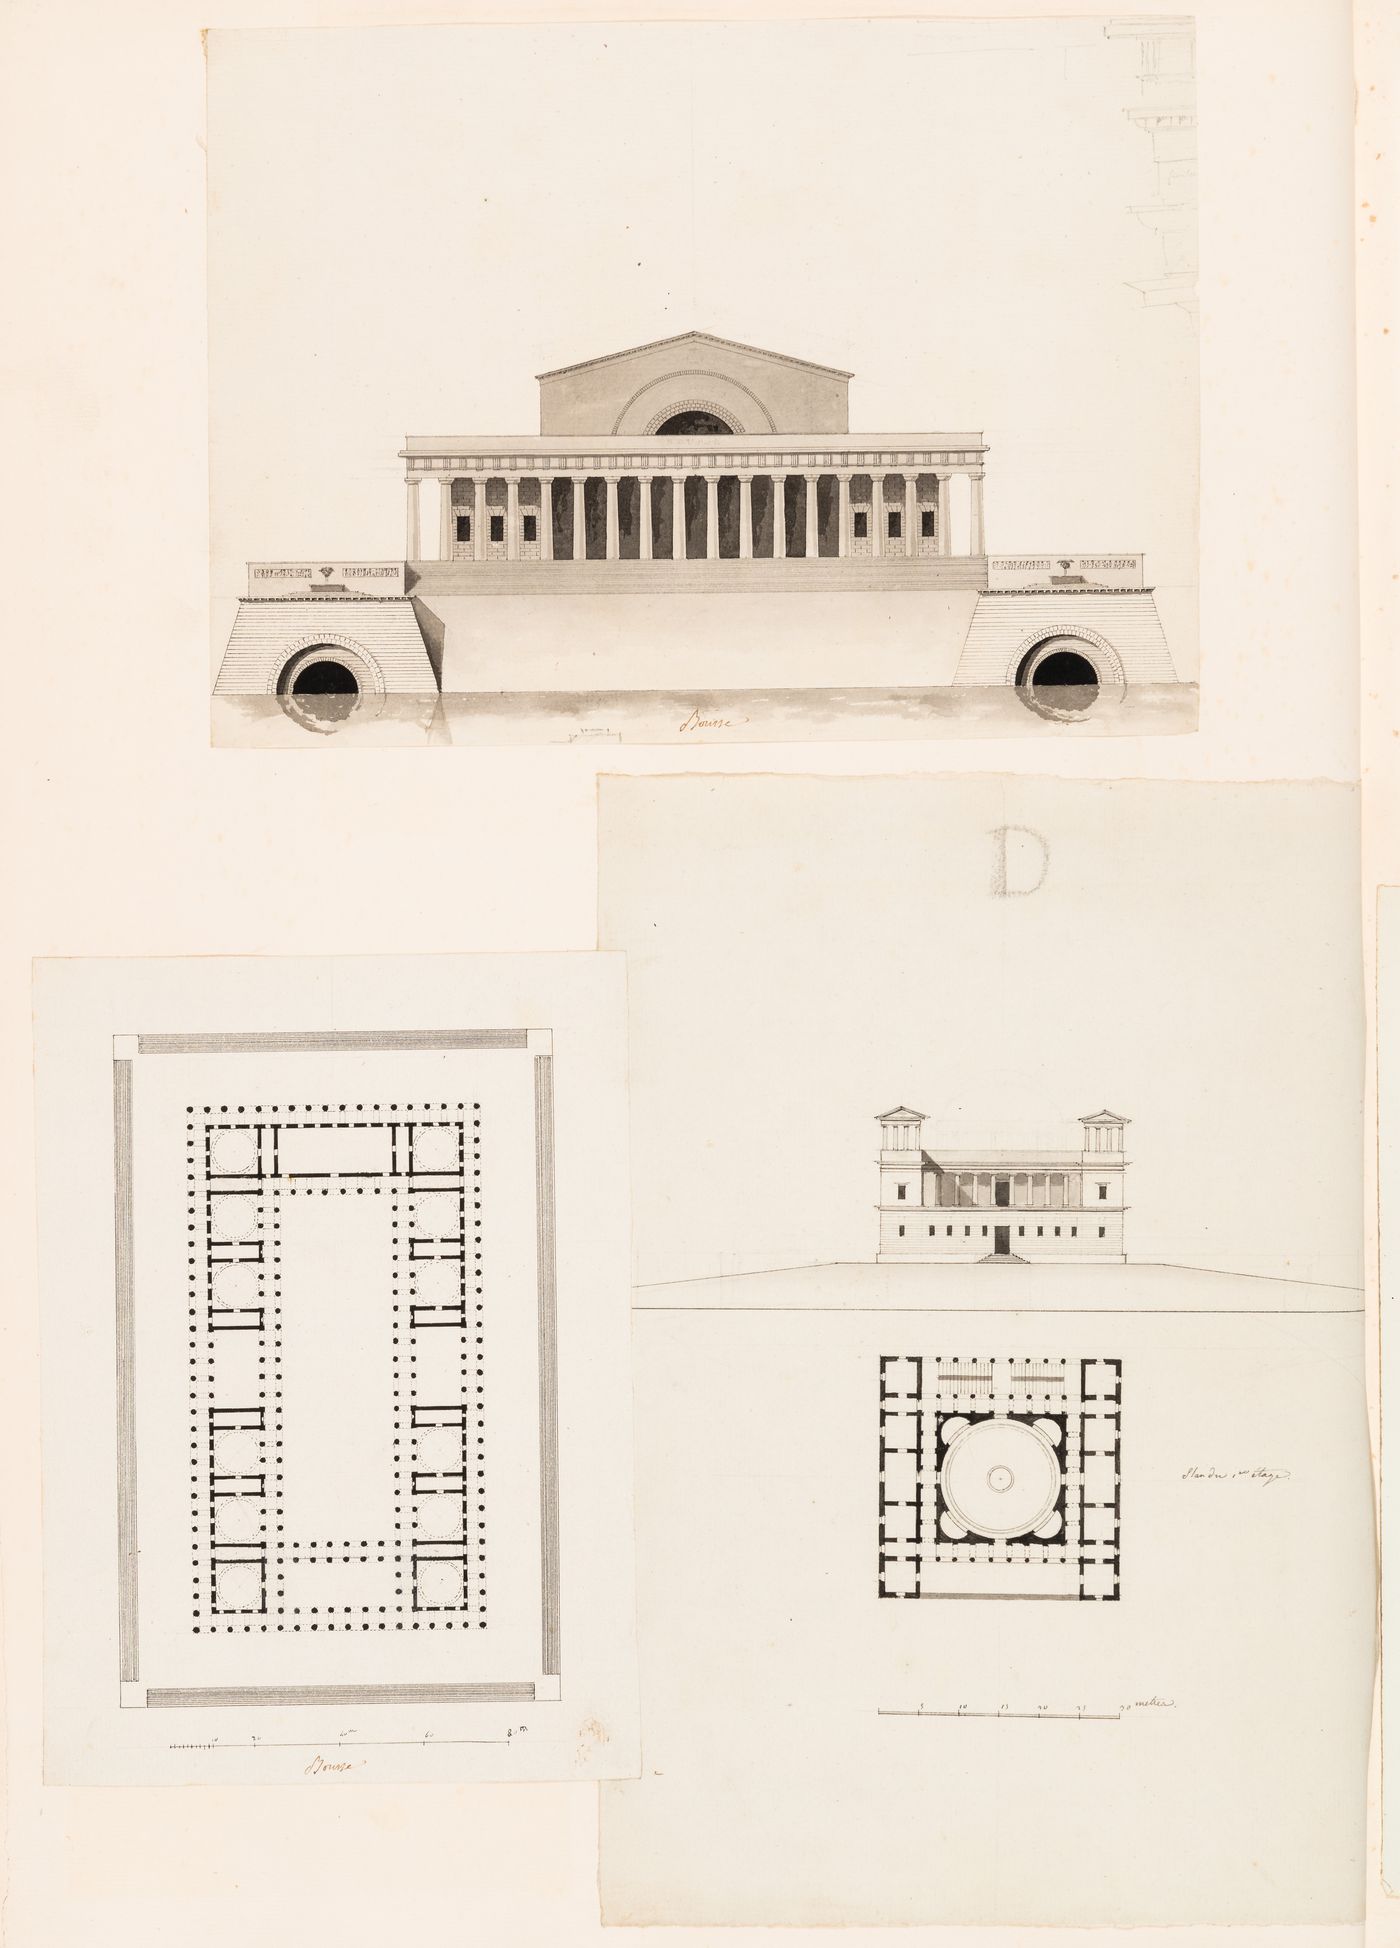 Half plans for a sepulchral chapel; Elevation for grotto stairs and cascades; verso: Elevation and plan for an exchange; Plan and elevation for an unidentified building, possibly an exchange